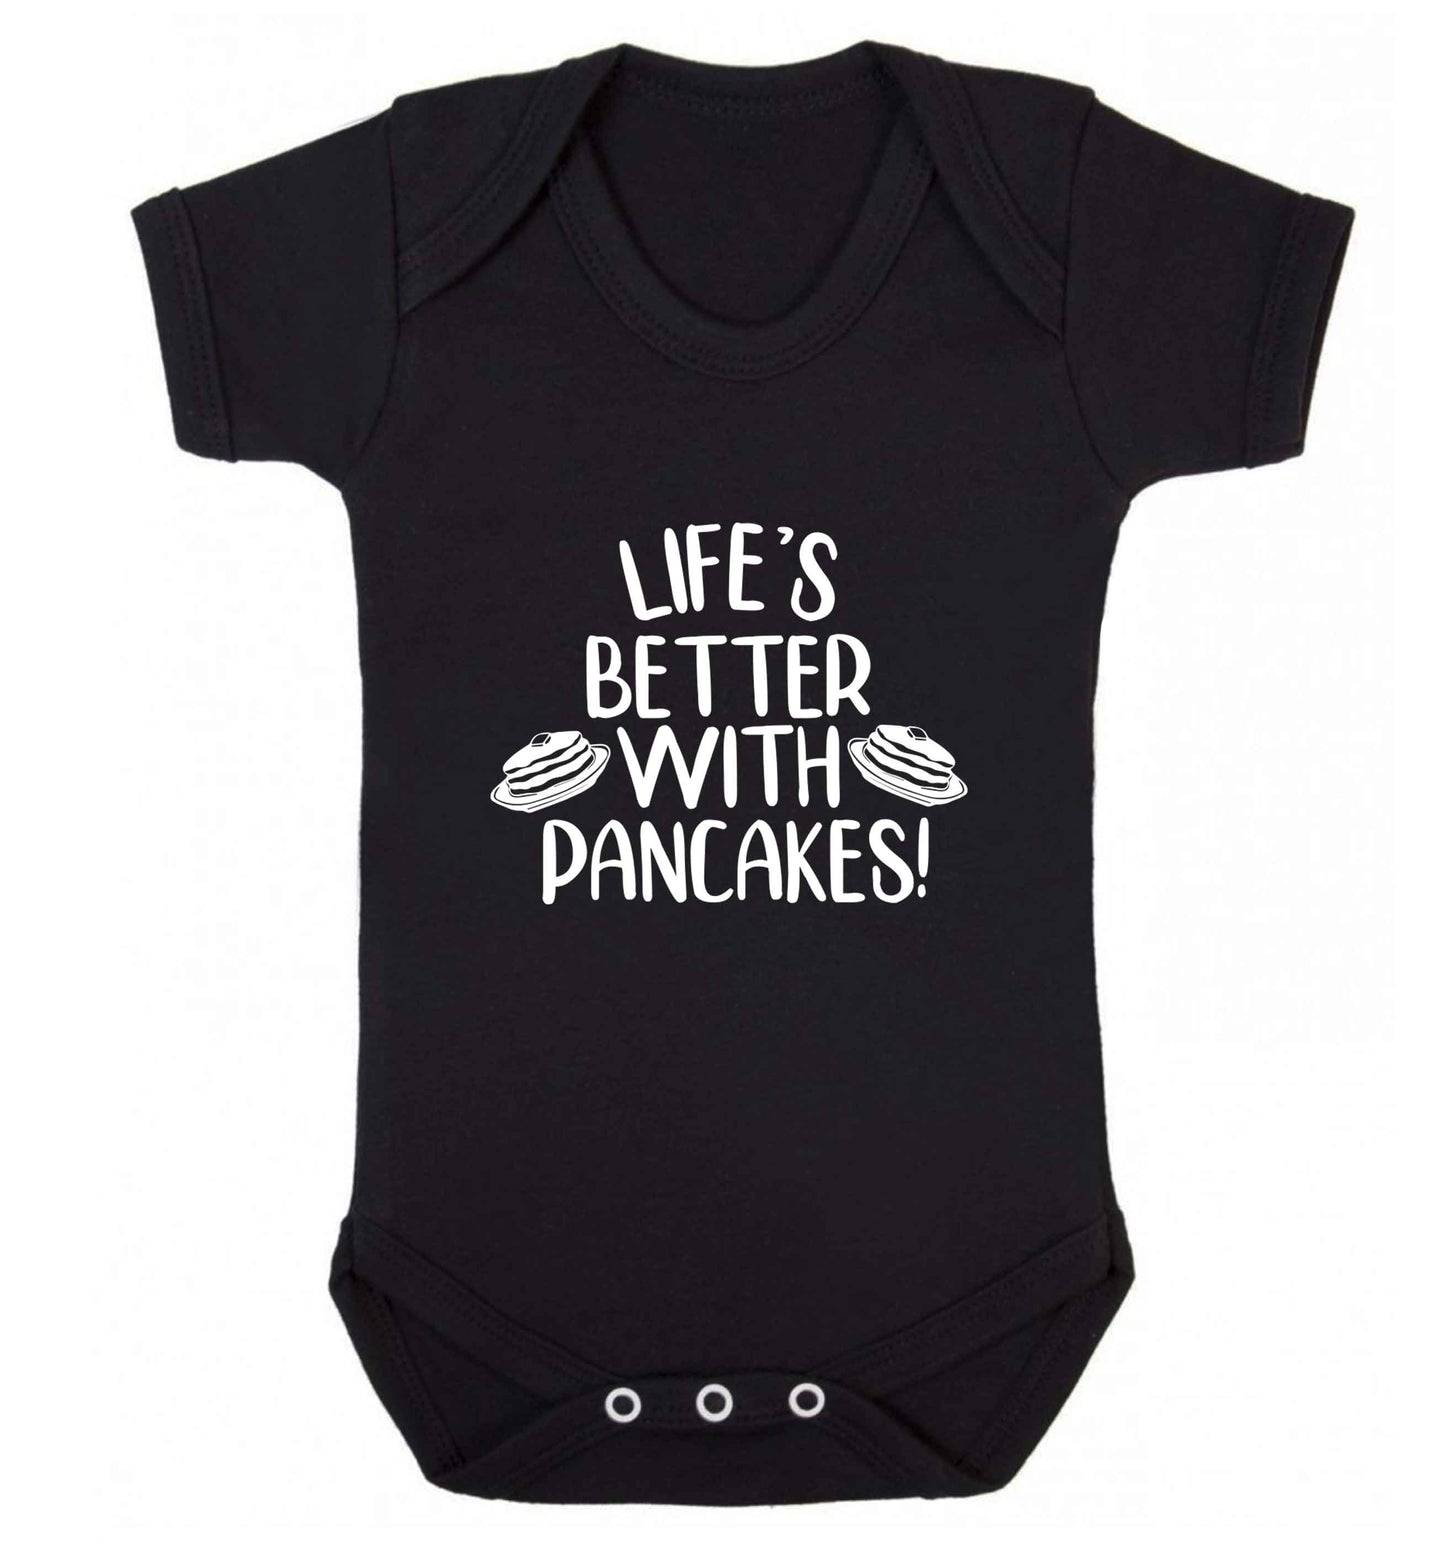 Life's better with pancakes baby vest black 18-24 months